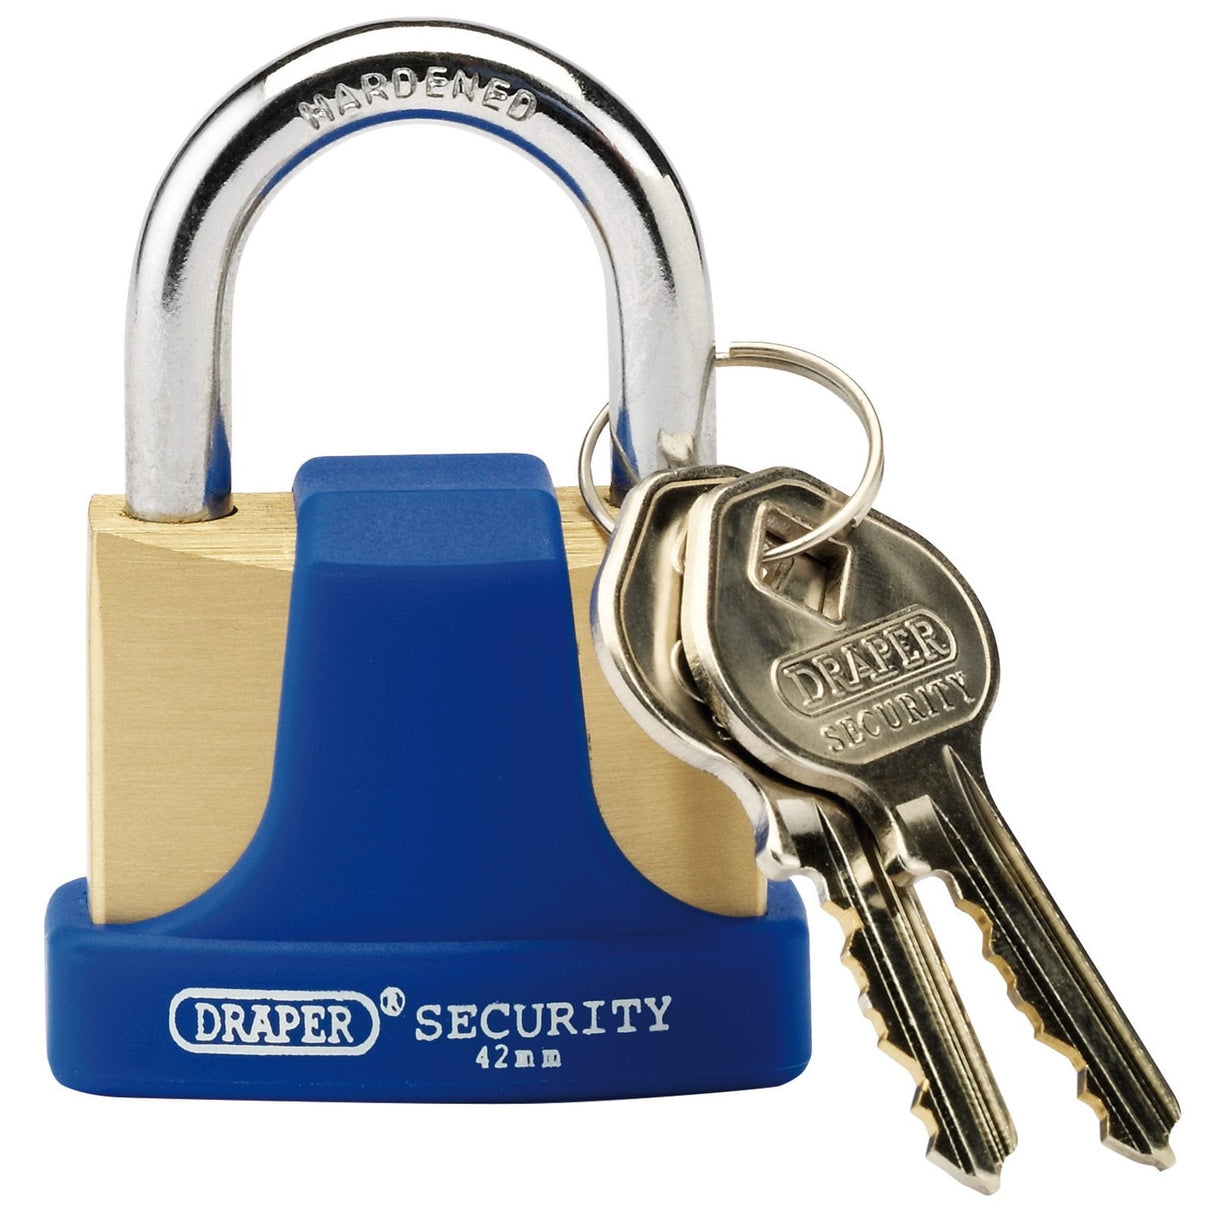 Draper Solid Brass Padlock And 2 Keys With Hardened Steel Shackle And Bumper, 42mm - 8303/42 - Farming Parts